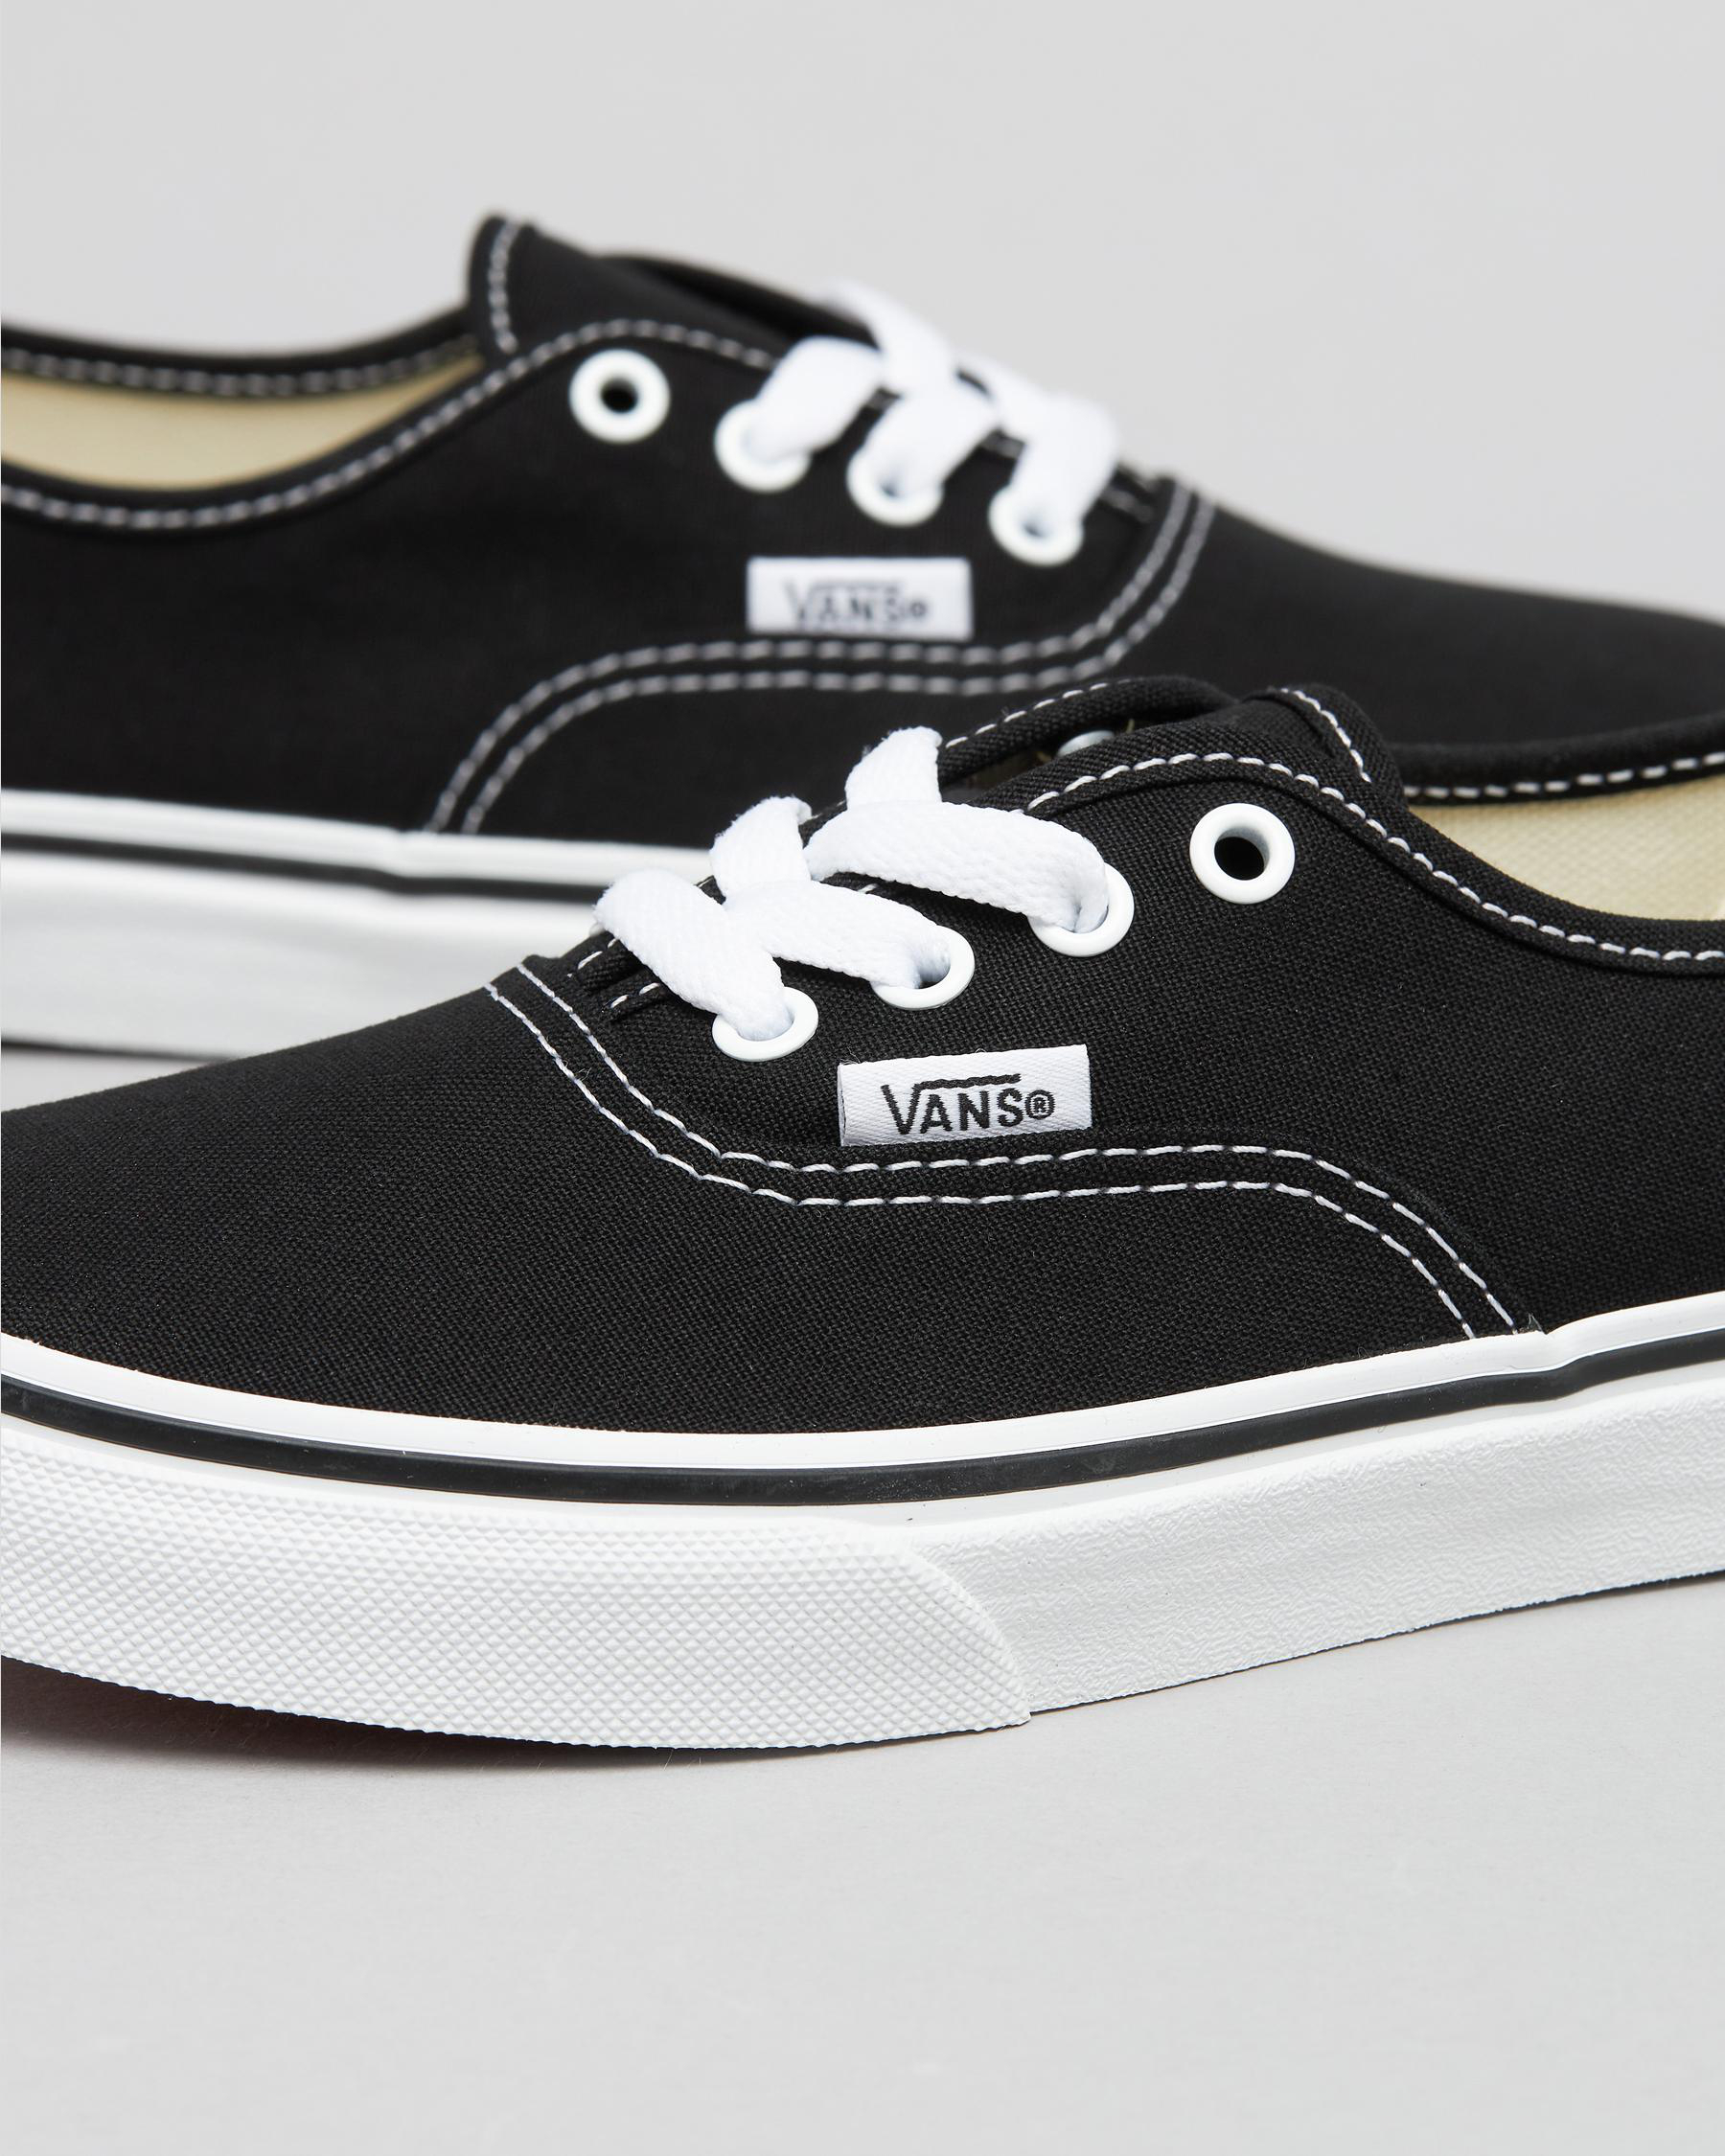 Shop Vans Kids' Authentic Shoes In Black/white - Fast Shipping & Easy ...